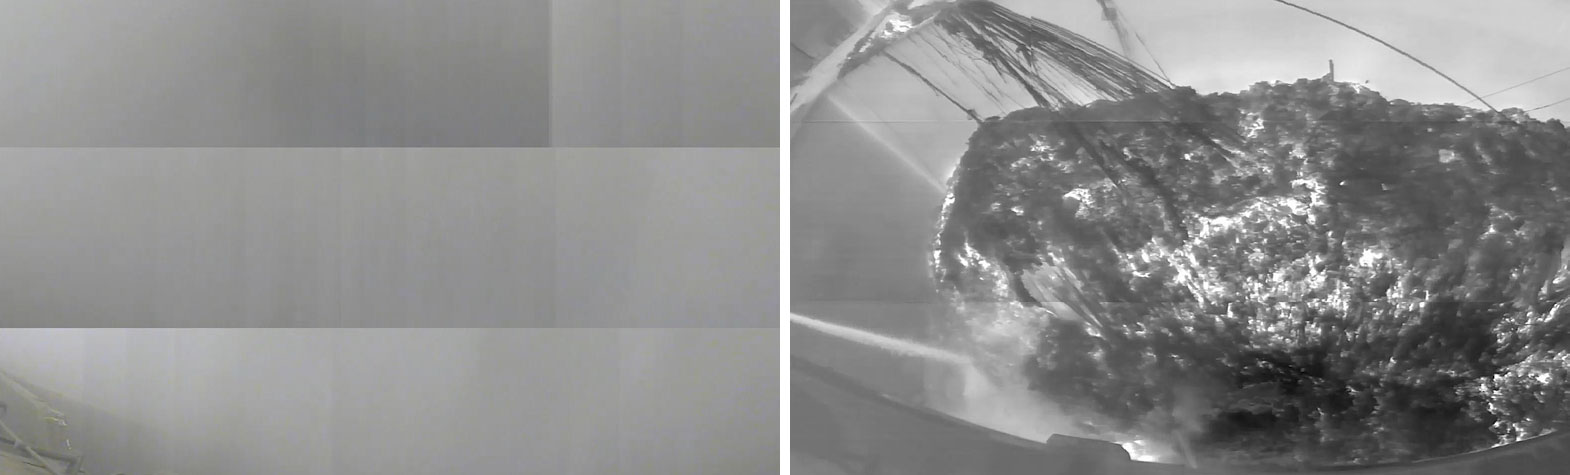 The thermal image clearly shows the monitoring area even through smoke and steam.